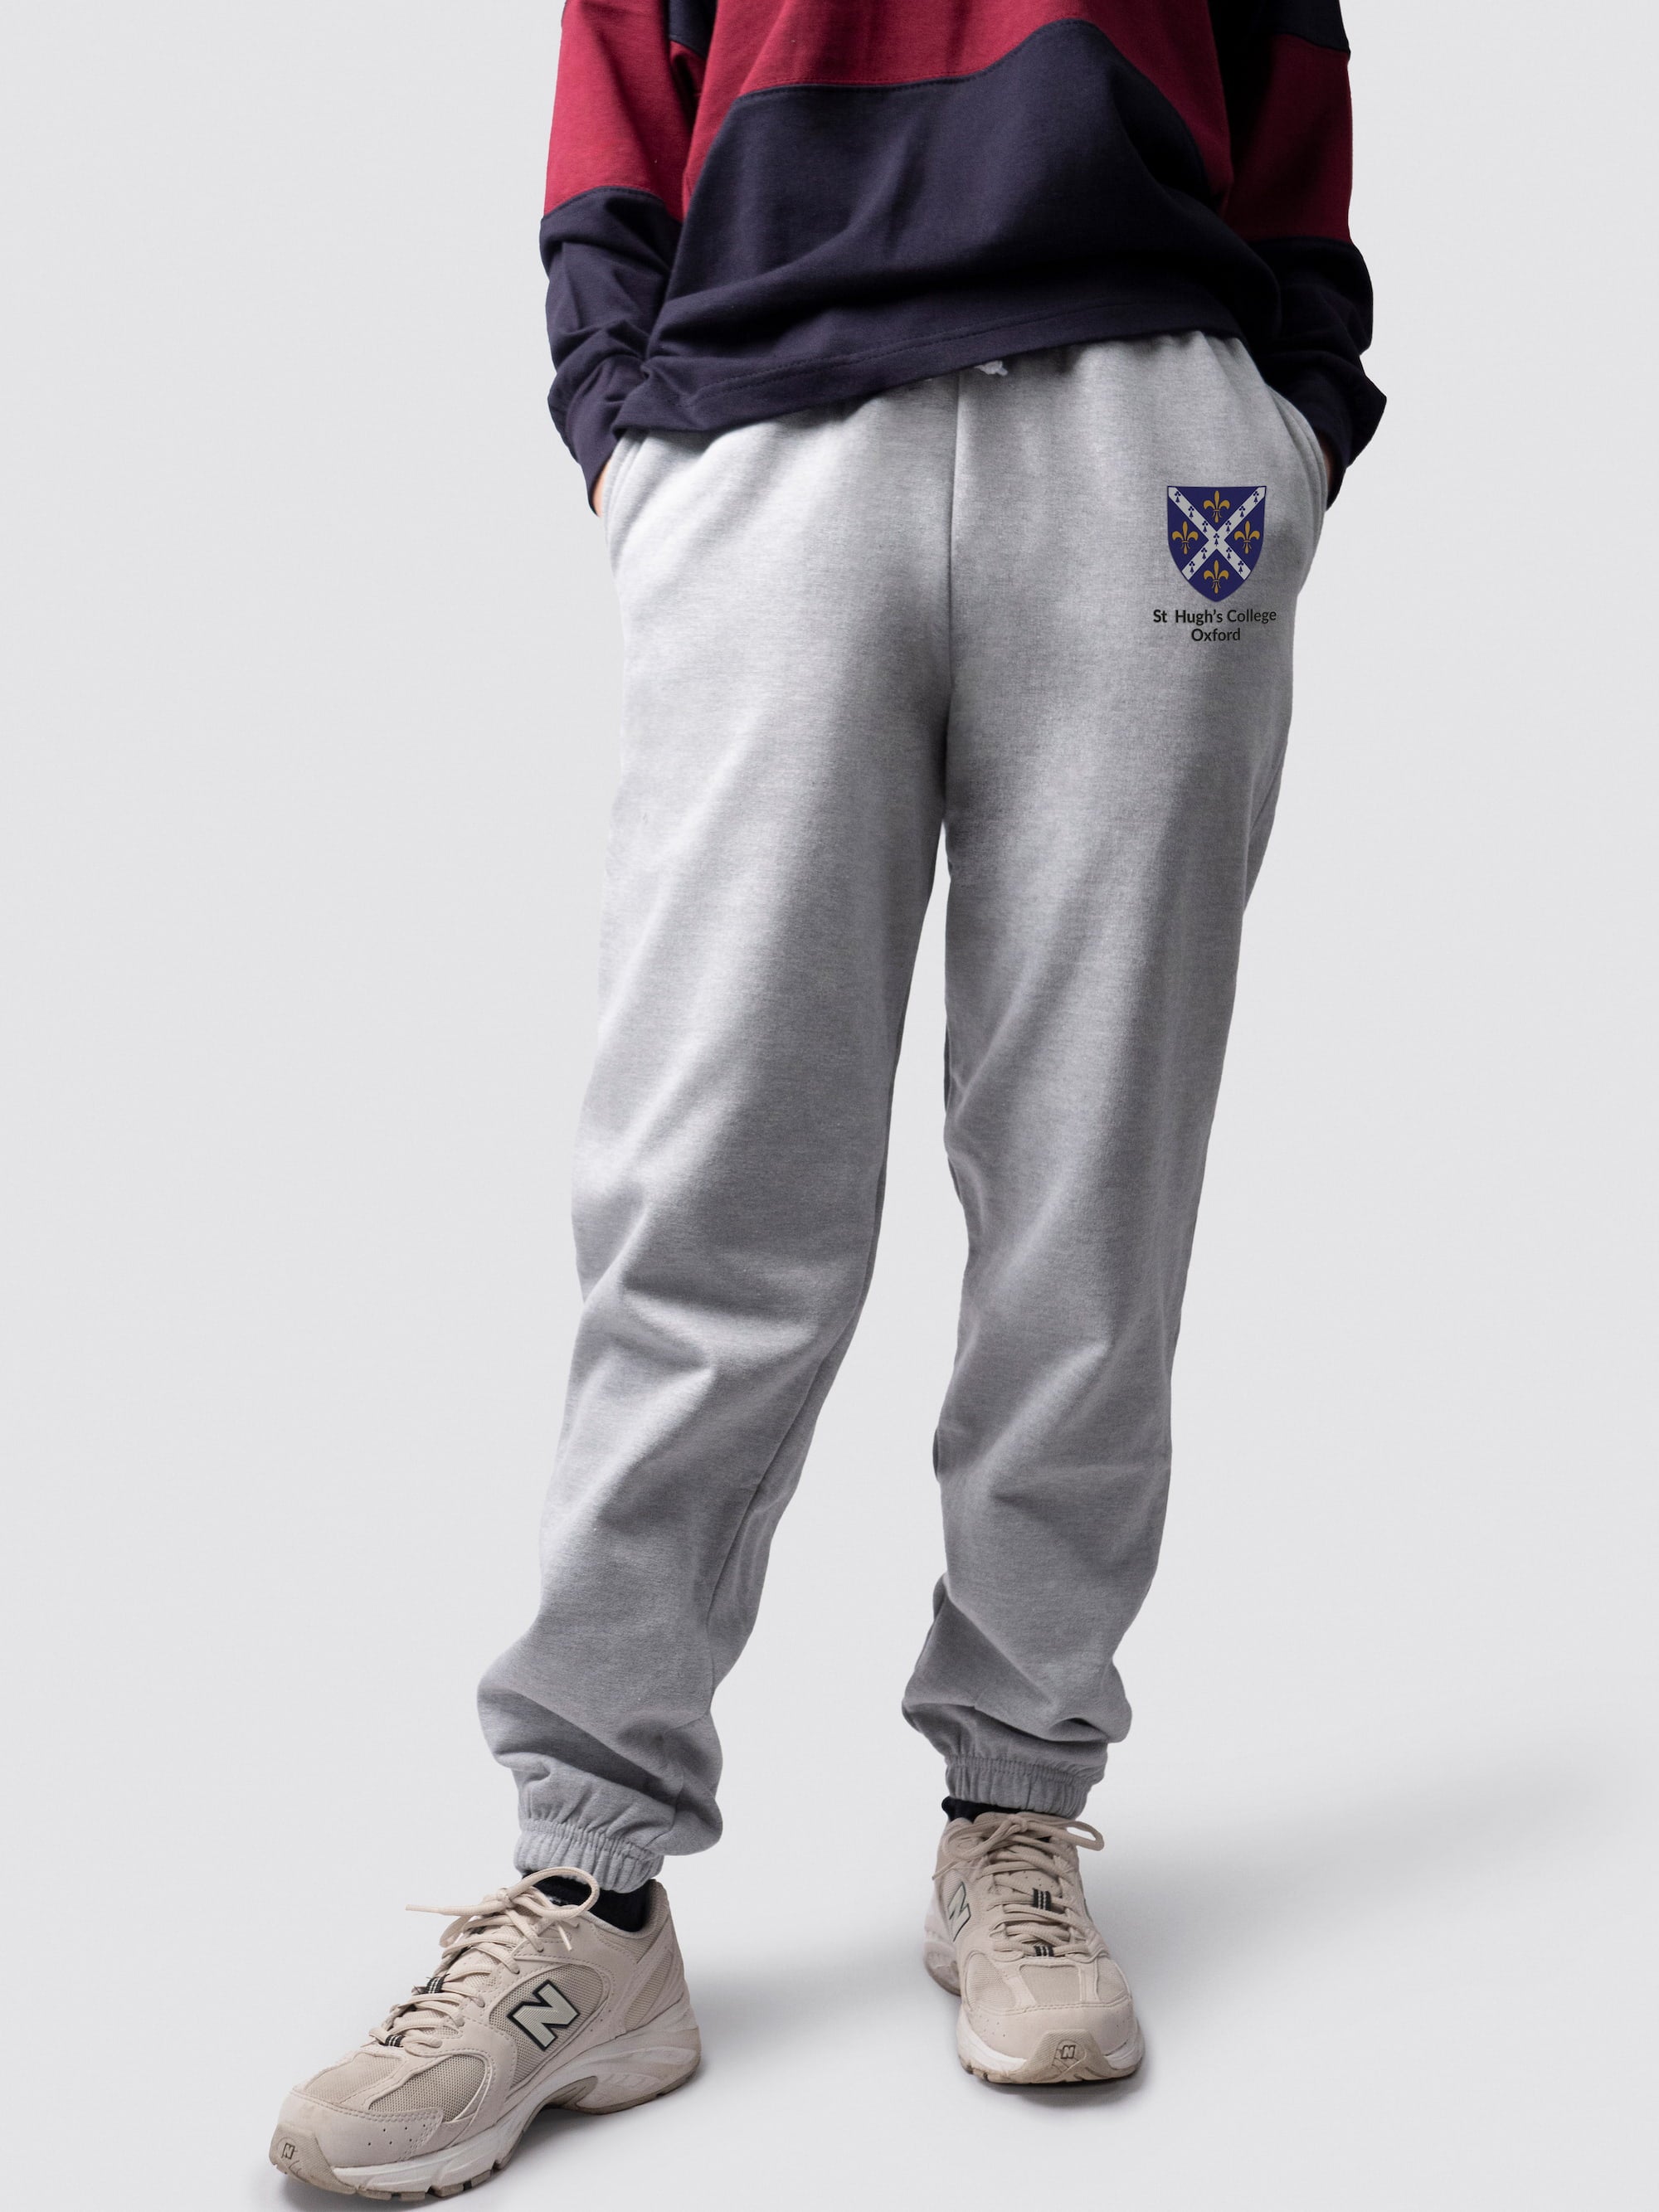 undergraduate cuffed sweatpants, made from soft cotton fabric, with St Hugh's logo